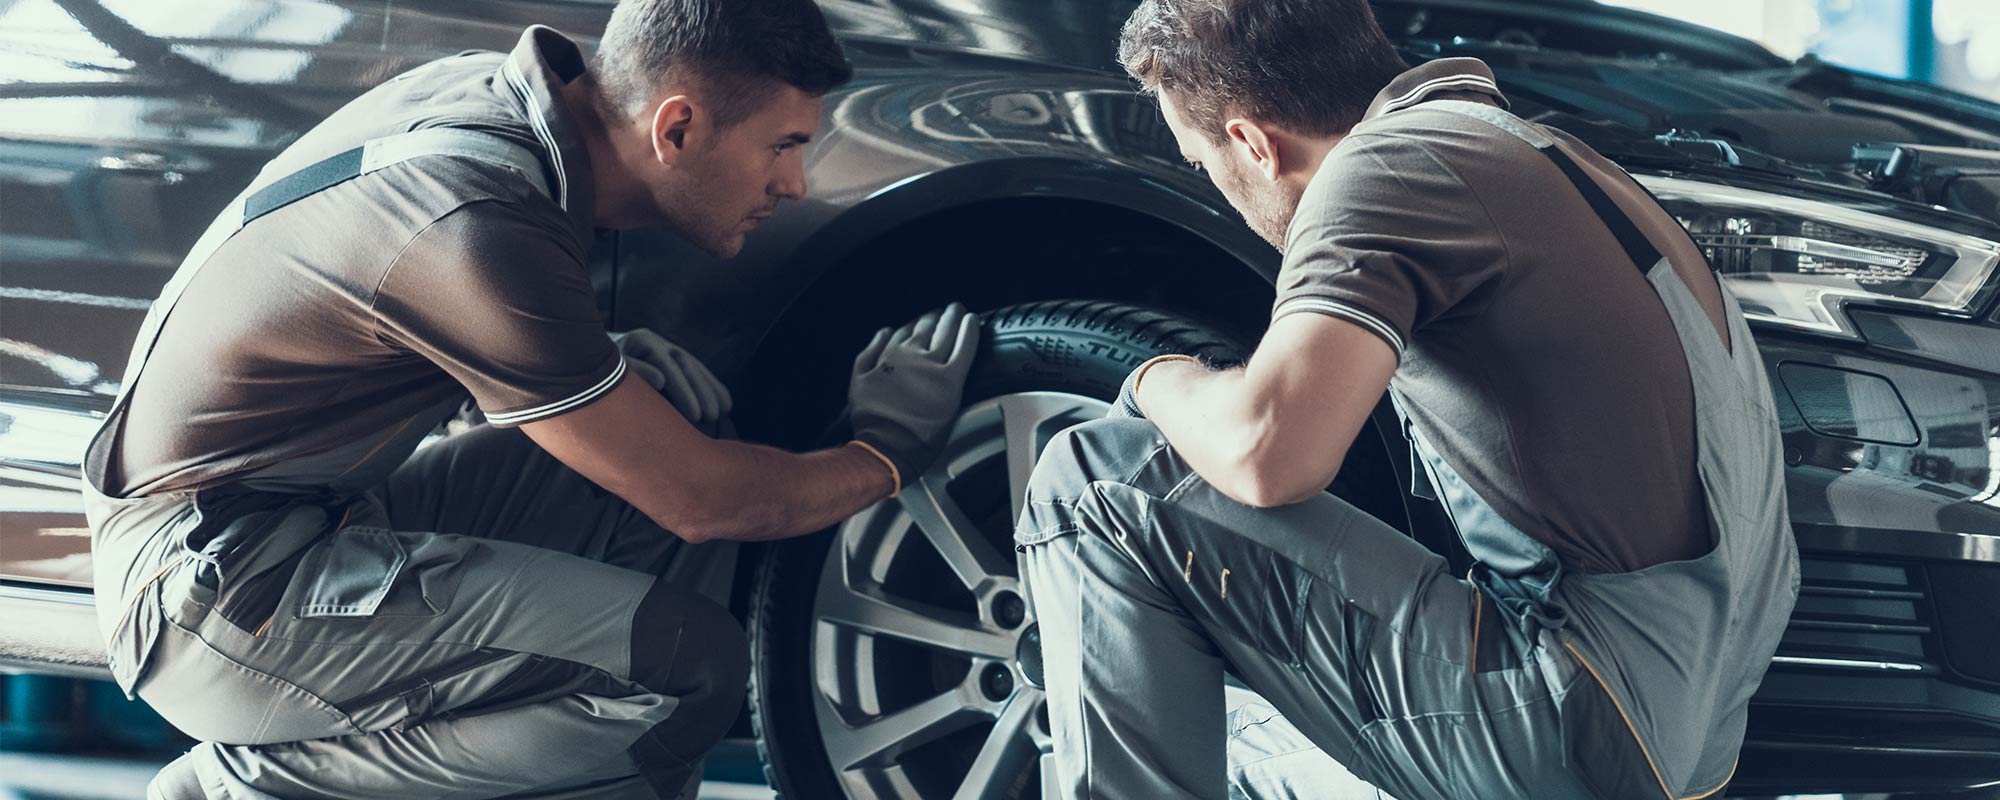 Domestic Auto Services in Lakewood, CO